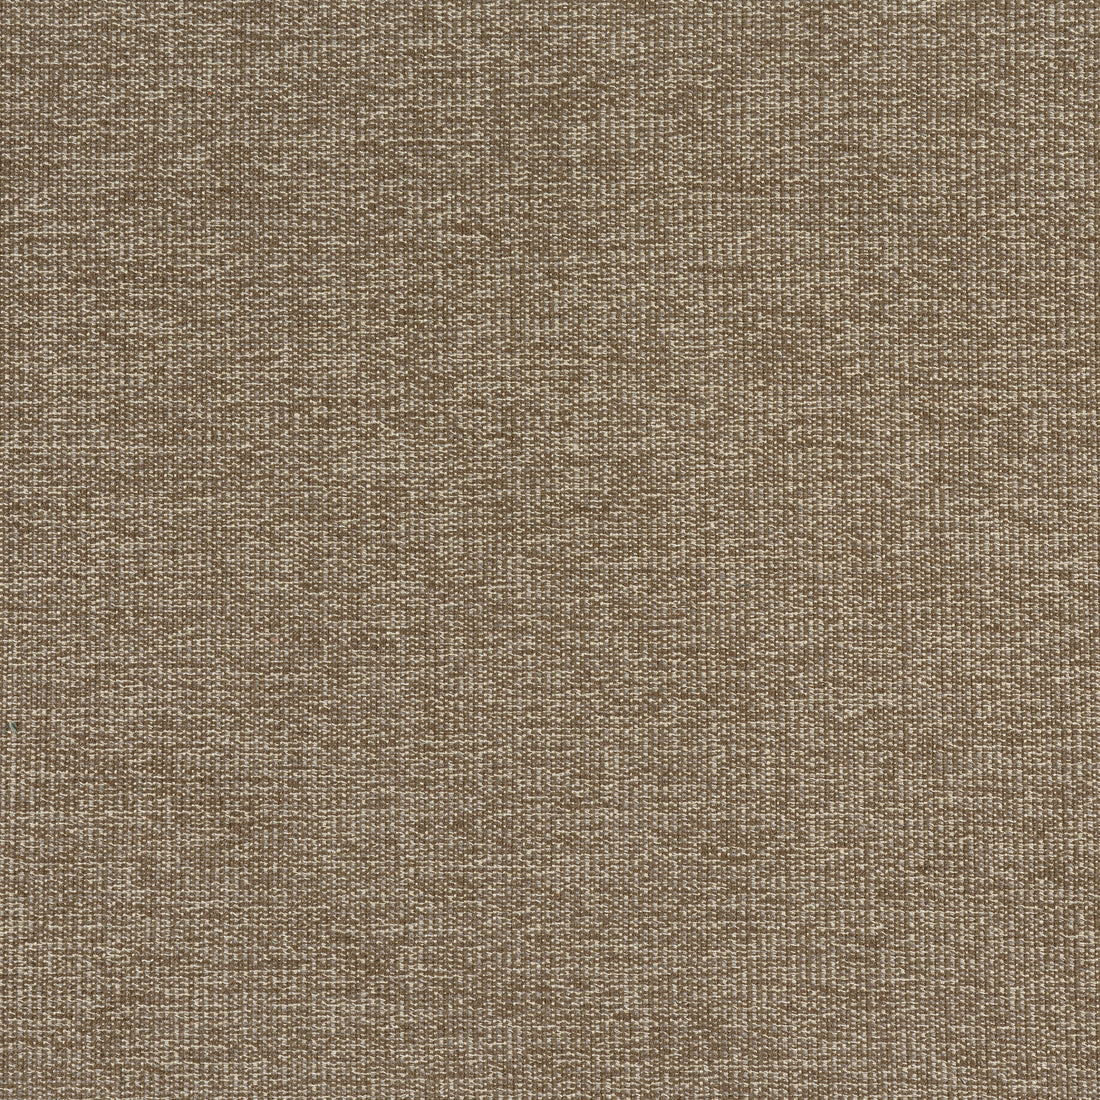 Sacchi fabric in mocha color - pattern number W8757 - by Thibaut in the Haven Textures collection